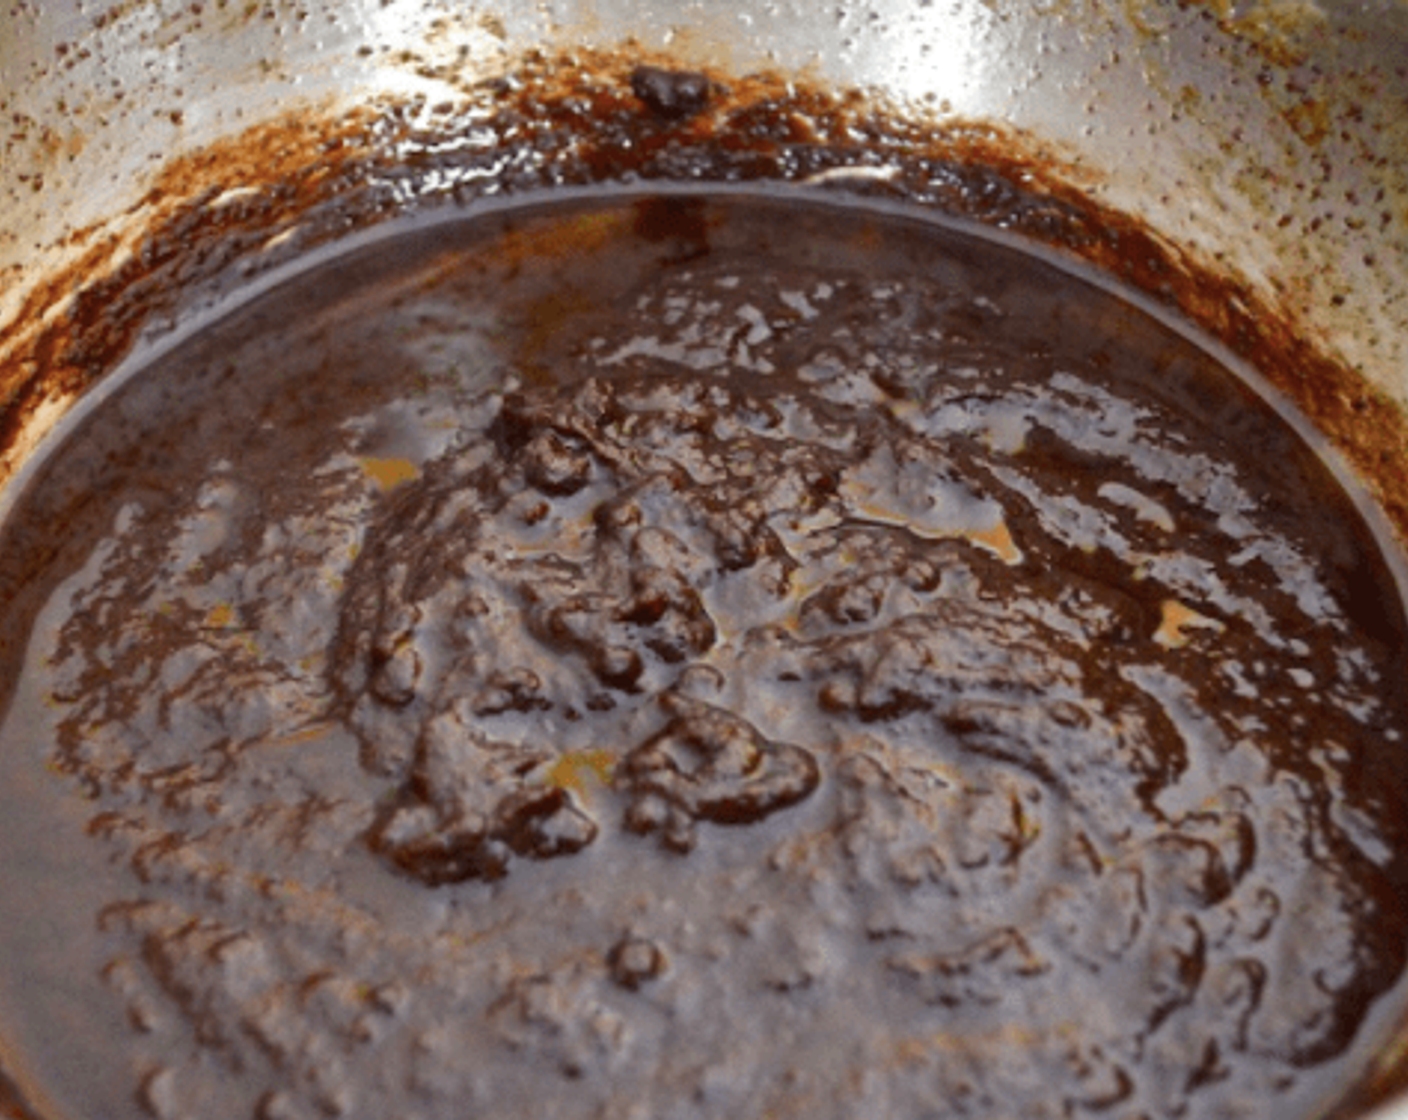 step 3 Then return the egg mixture back into the pan, along with the Unsweetened Cocoa Powder (1 Tbsp) and Godiva® Chocolate Liqueur (1/4 tsp).  Stir it constantly until it cooks through and thickens for about 5 minutes. Stir in the Dark Chocolate Chips (1 cup) until they melt in.